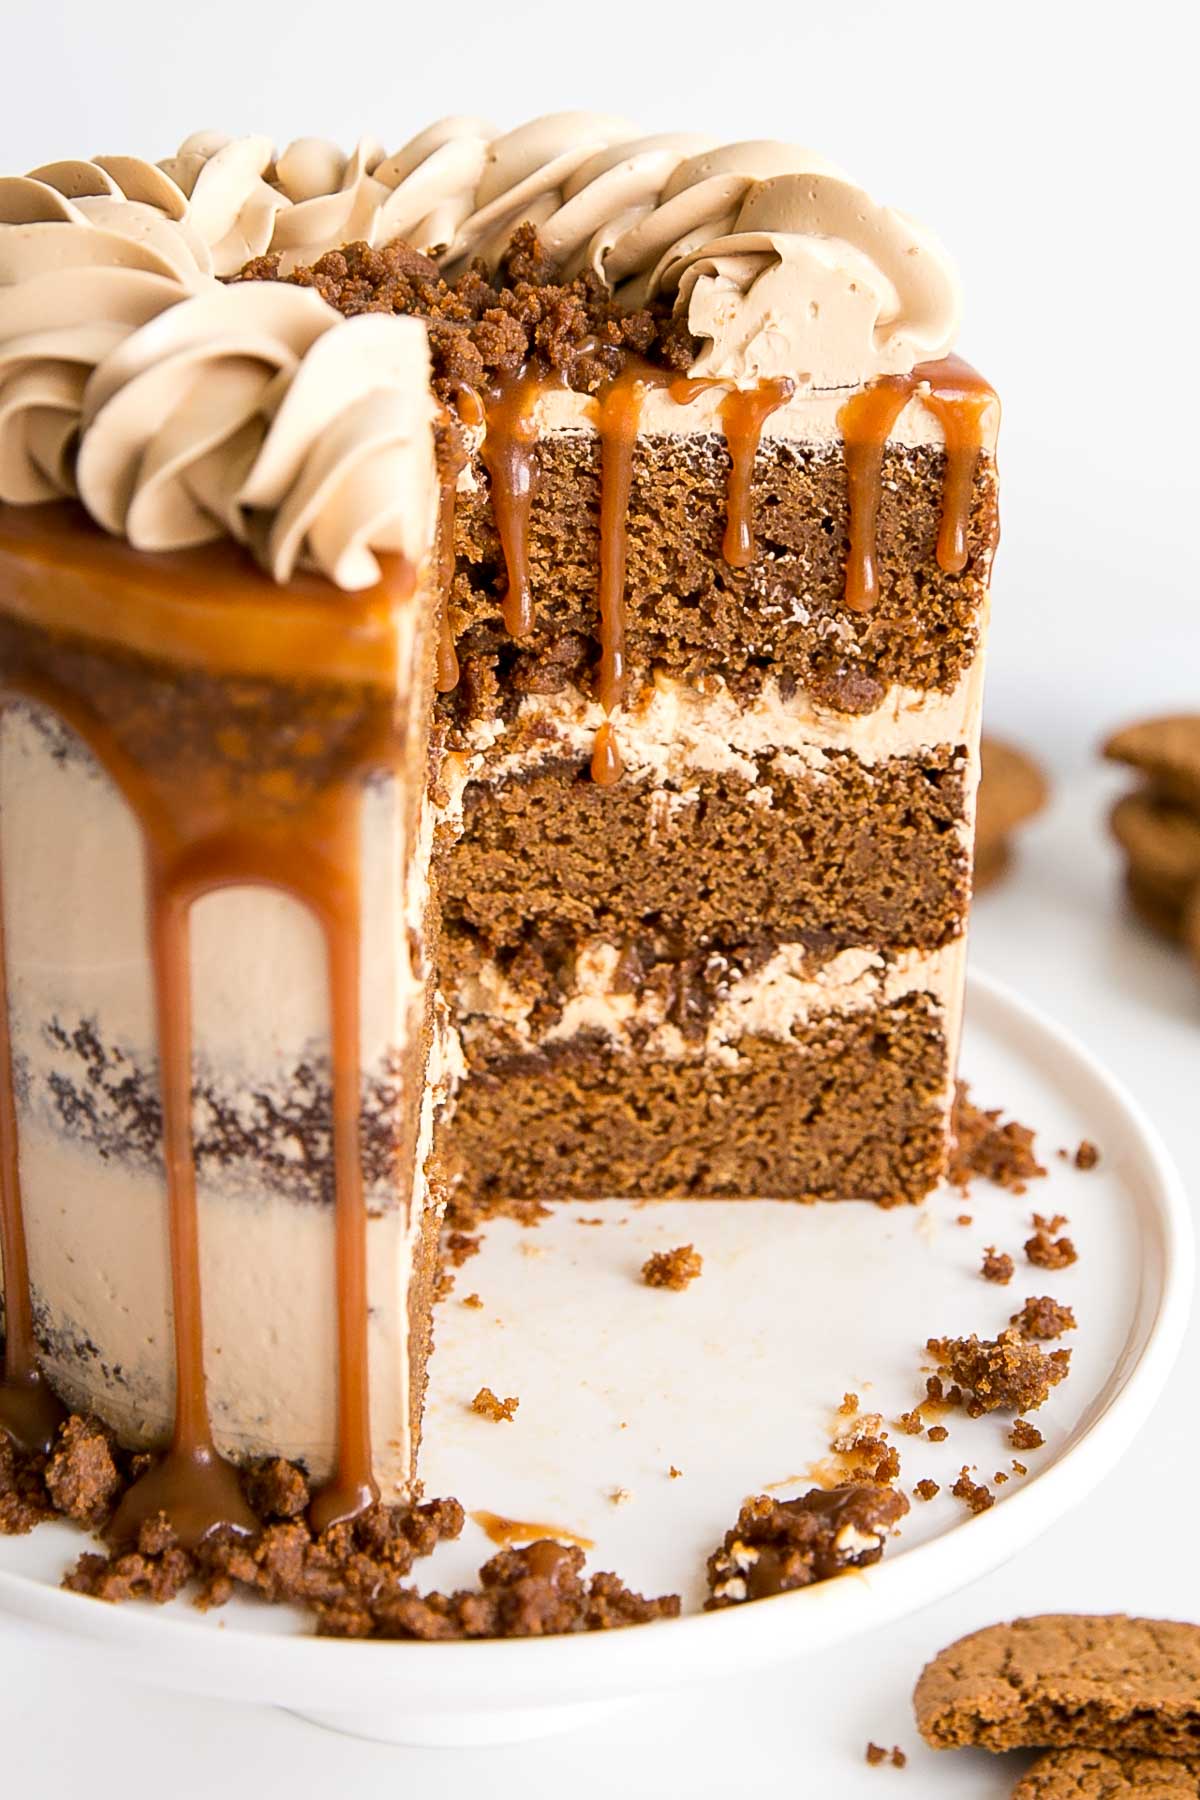 Cross section showing gingerbread cake layers, caramel buttercream and gingerbread streusel.